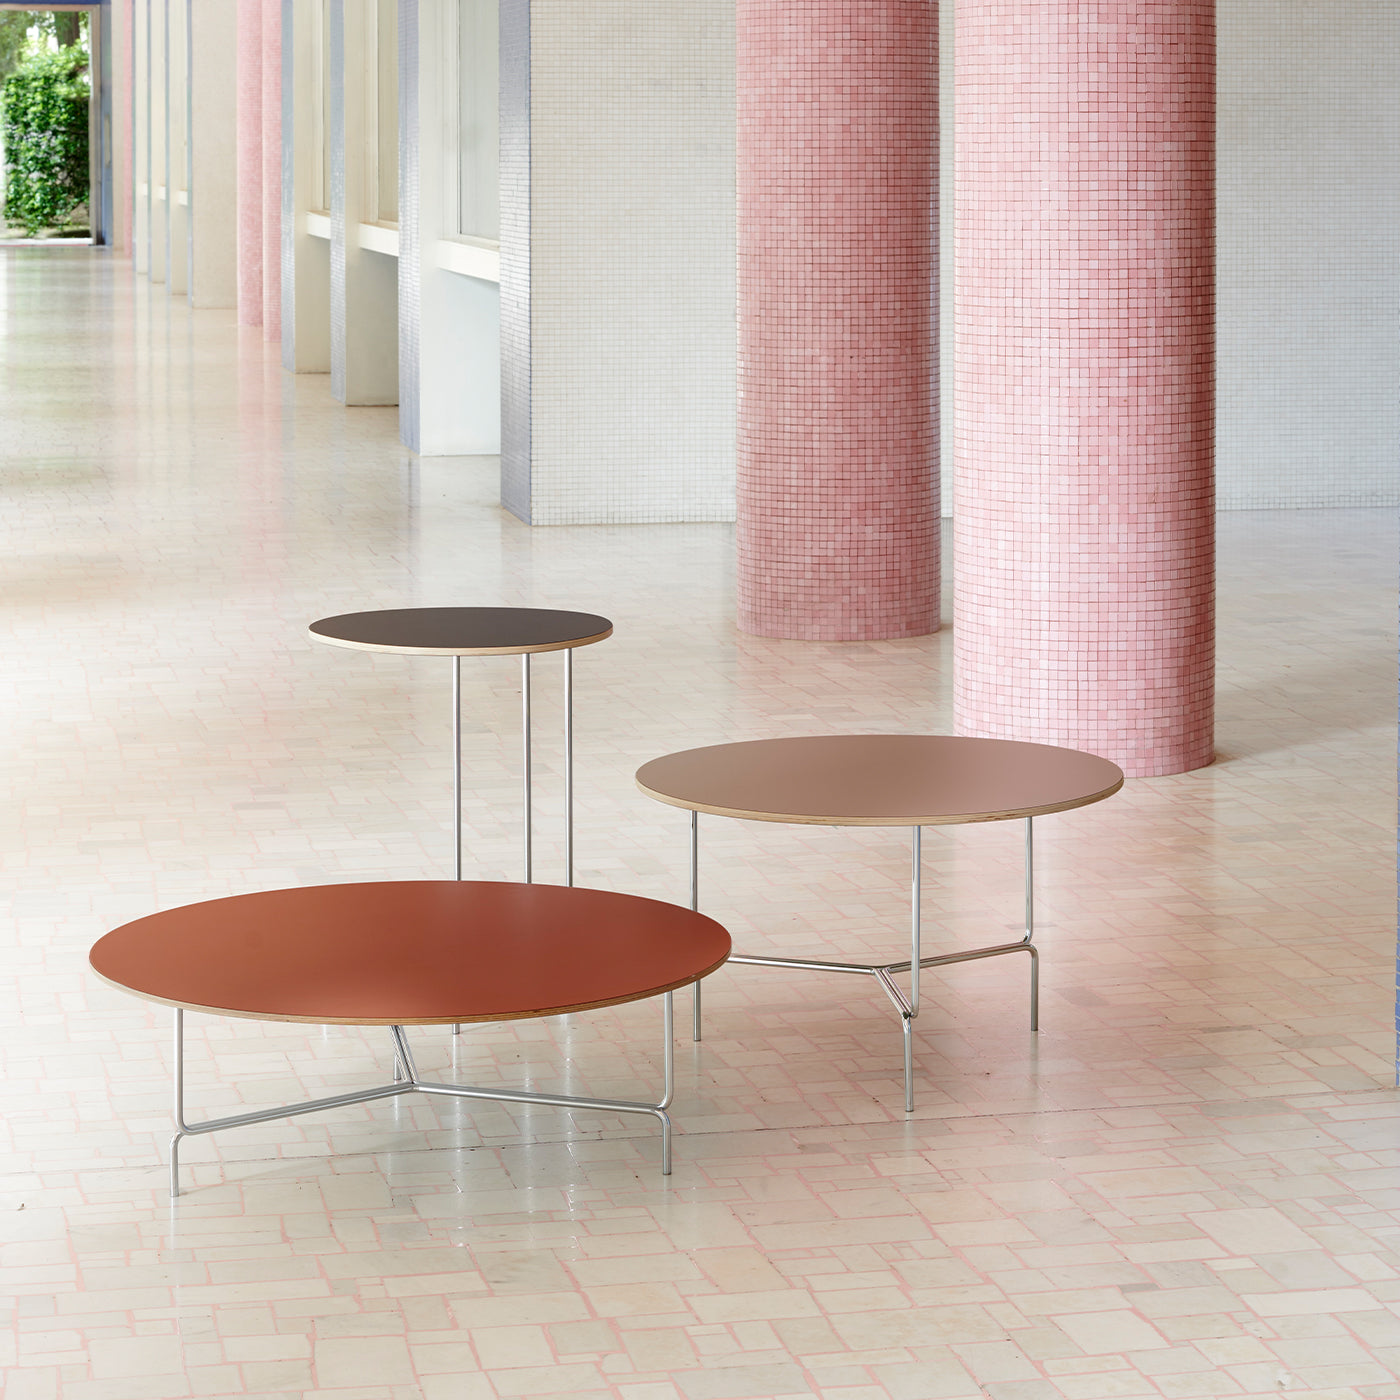 Litta Pink Coffee Table by R. Mangiarotti and I. Suppanen - Alternative view 3